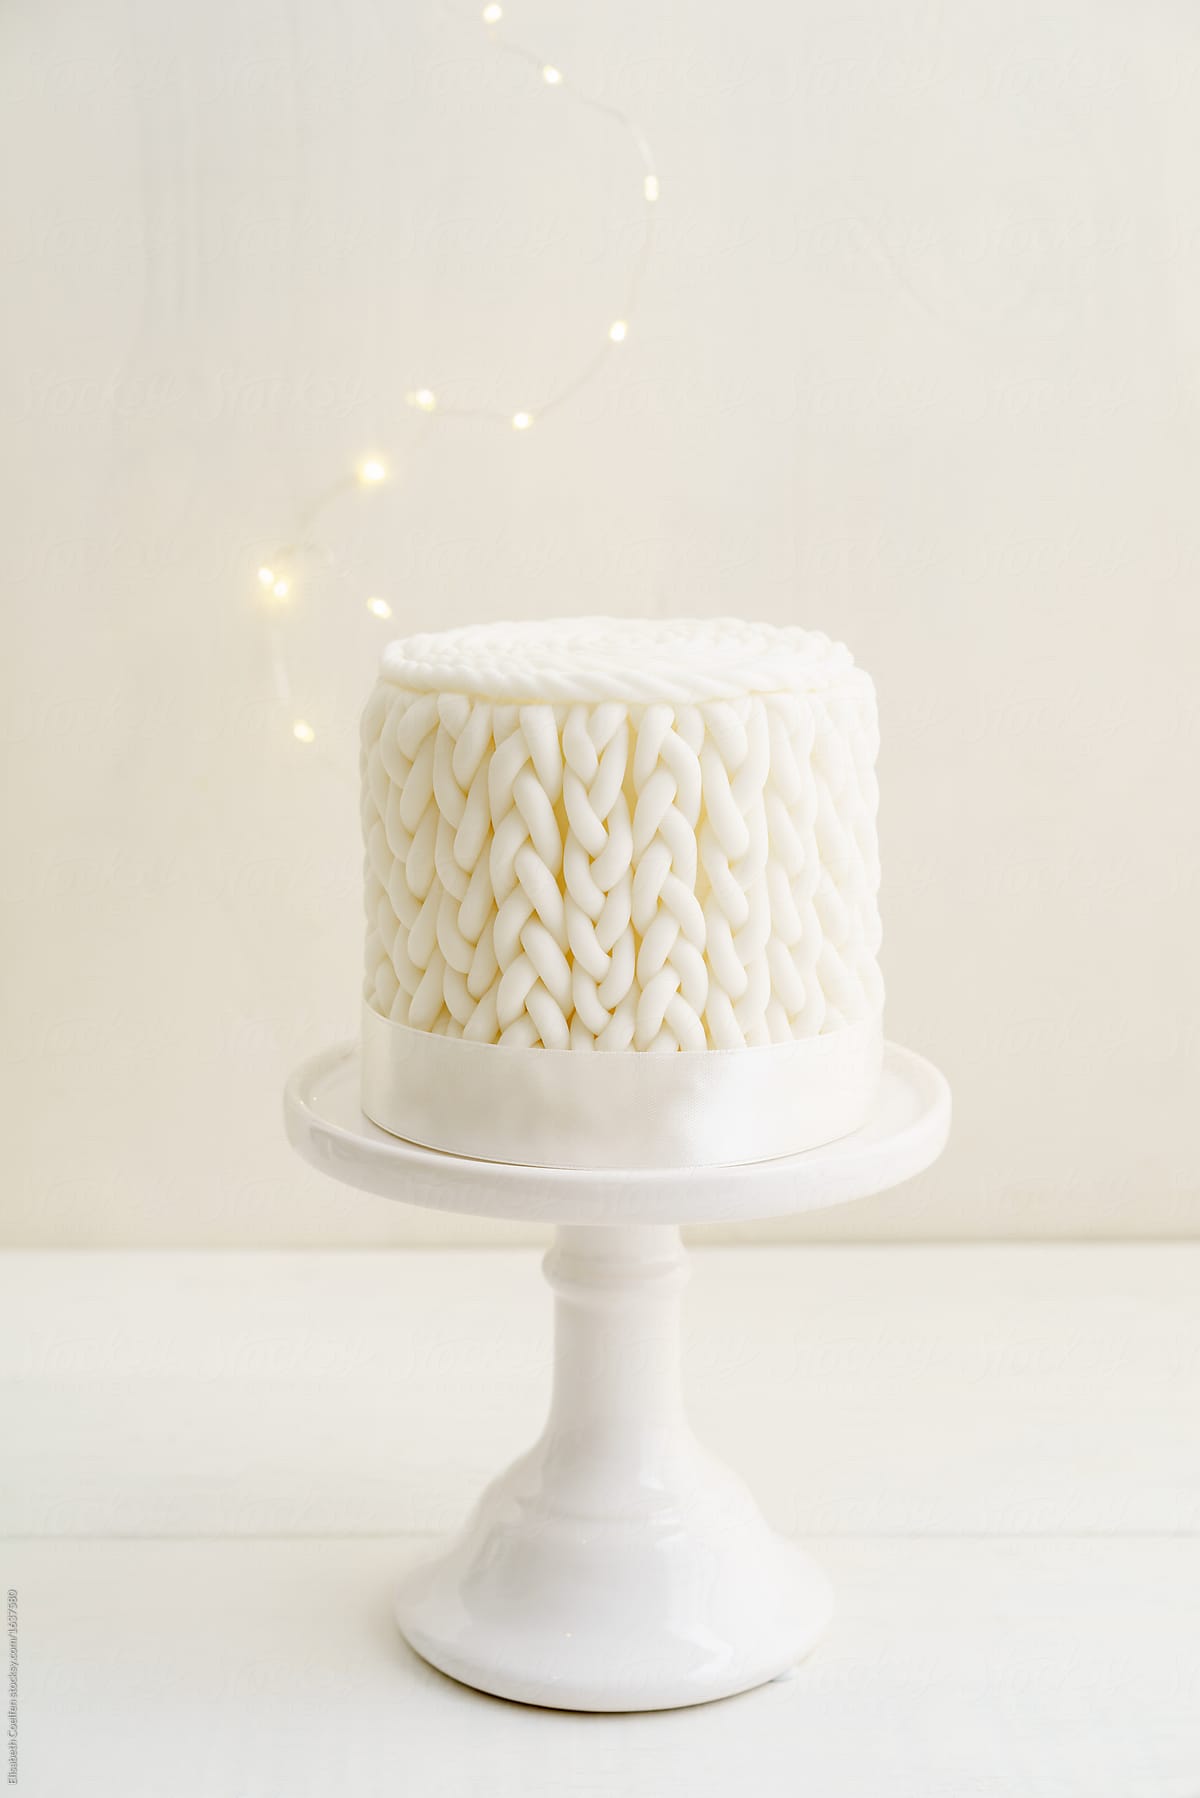 White Winter Cake With Knitted Pattern Made Of Fondant